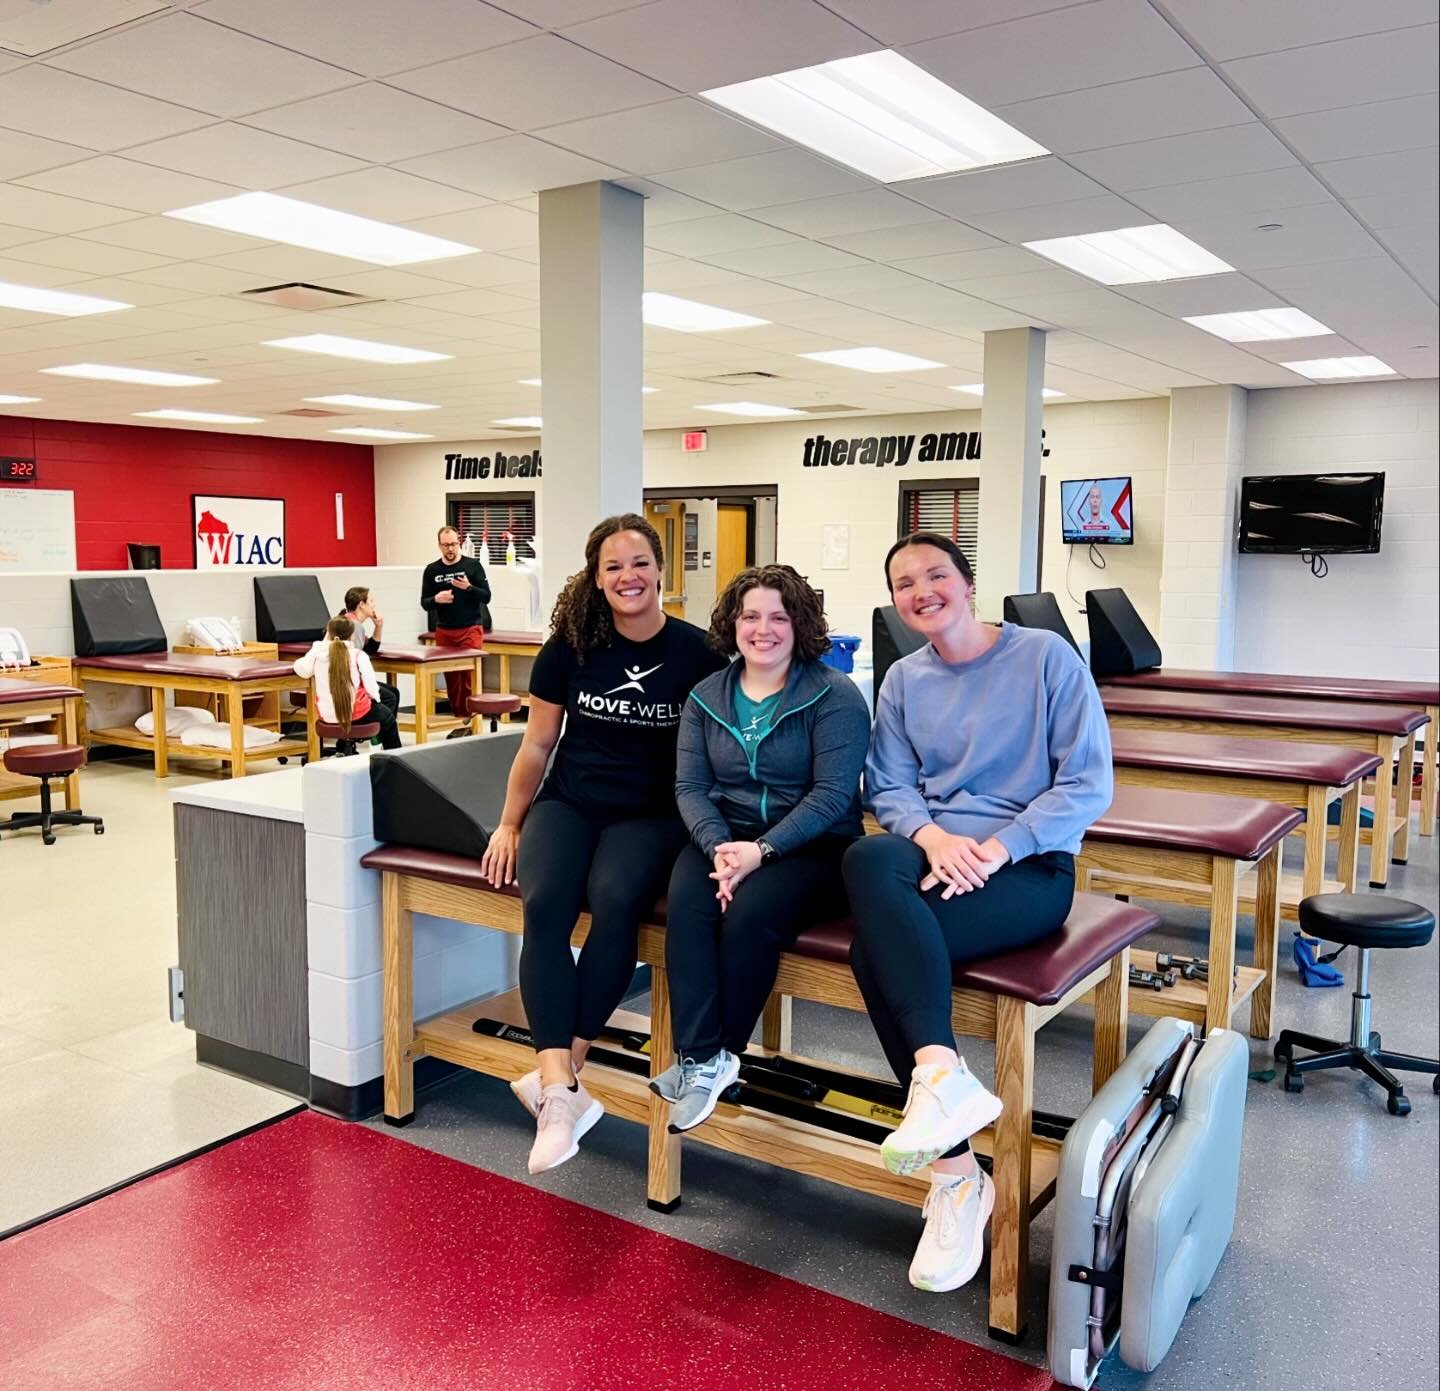 That&rsquo;s a wrap on our first year in the @uwrffalcons athletic training room!  We will be back in the fall but until then we can be found full time at our clinic in Hudson. Have a great summer!

Booking available at movewellclinic.com

@uwriverfa